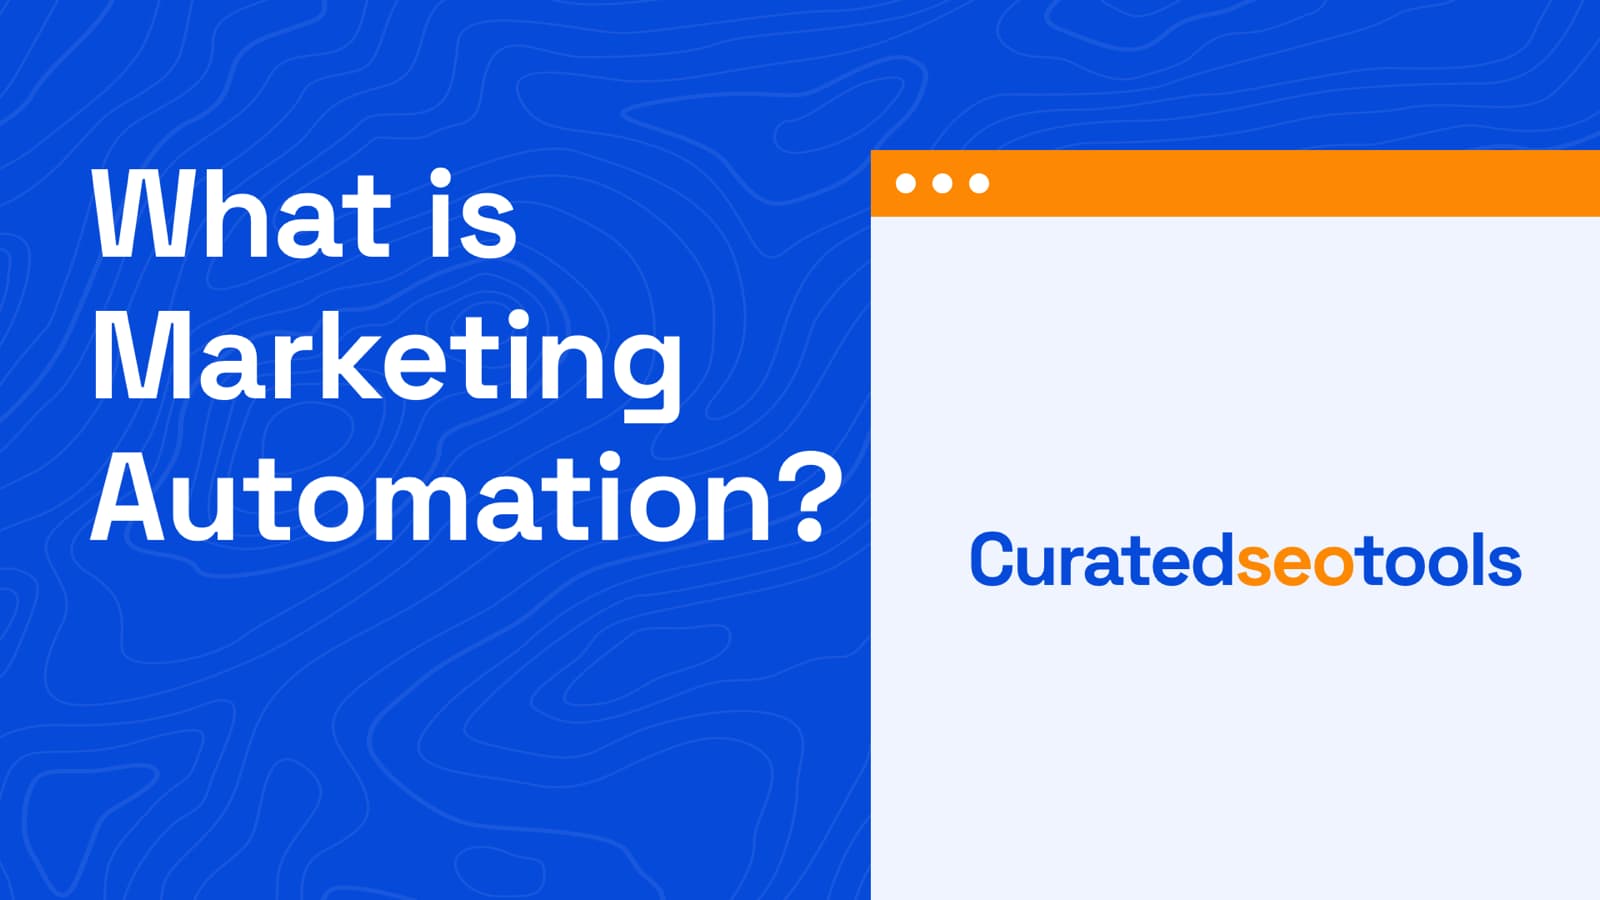 The cover image about the content title which is "What is marketing automation?" and a browser shaped graphic element